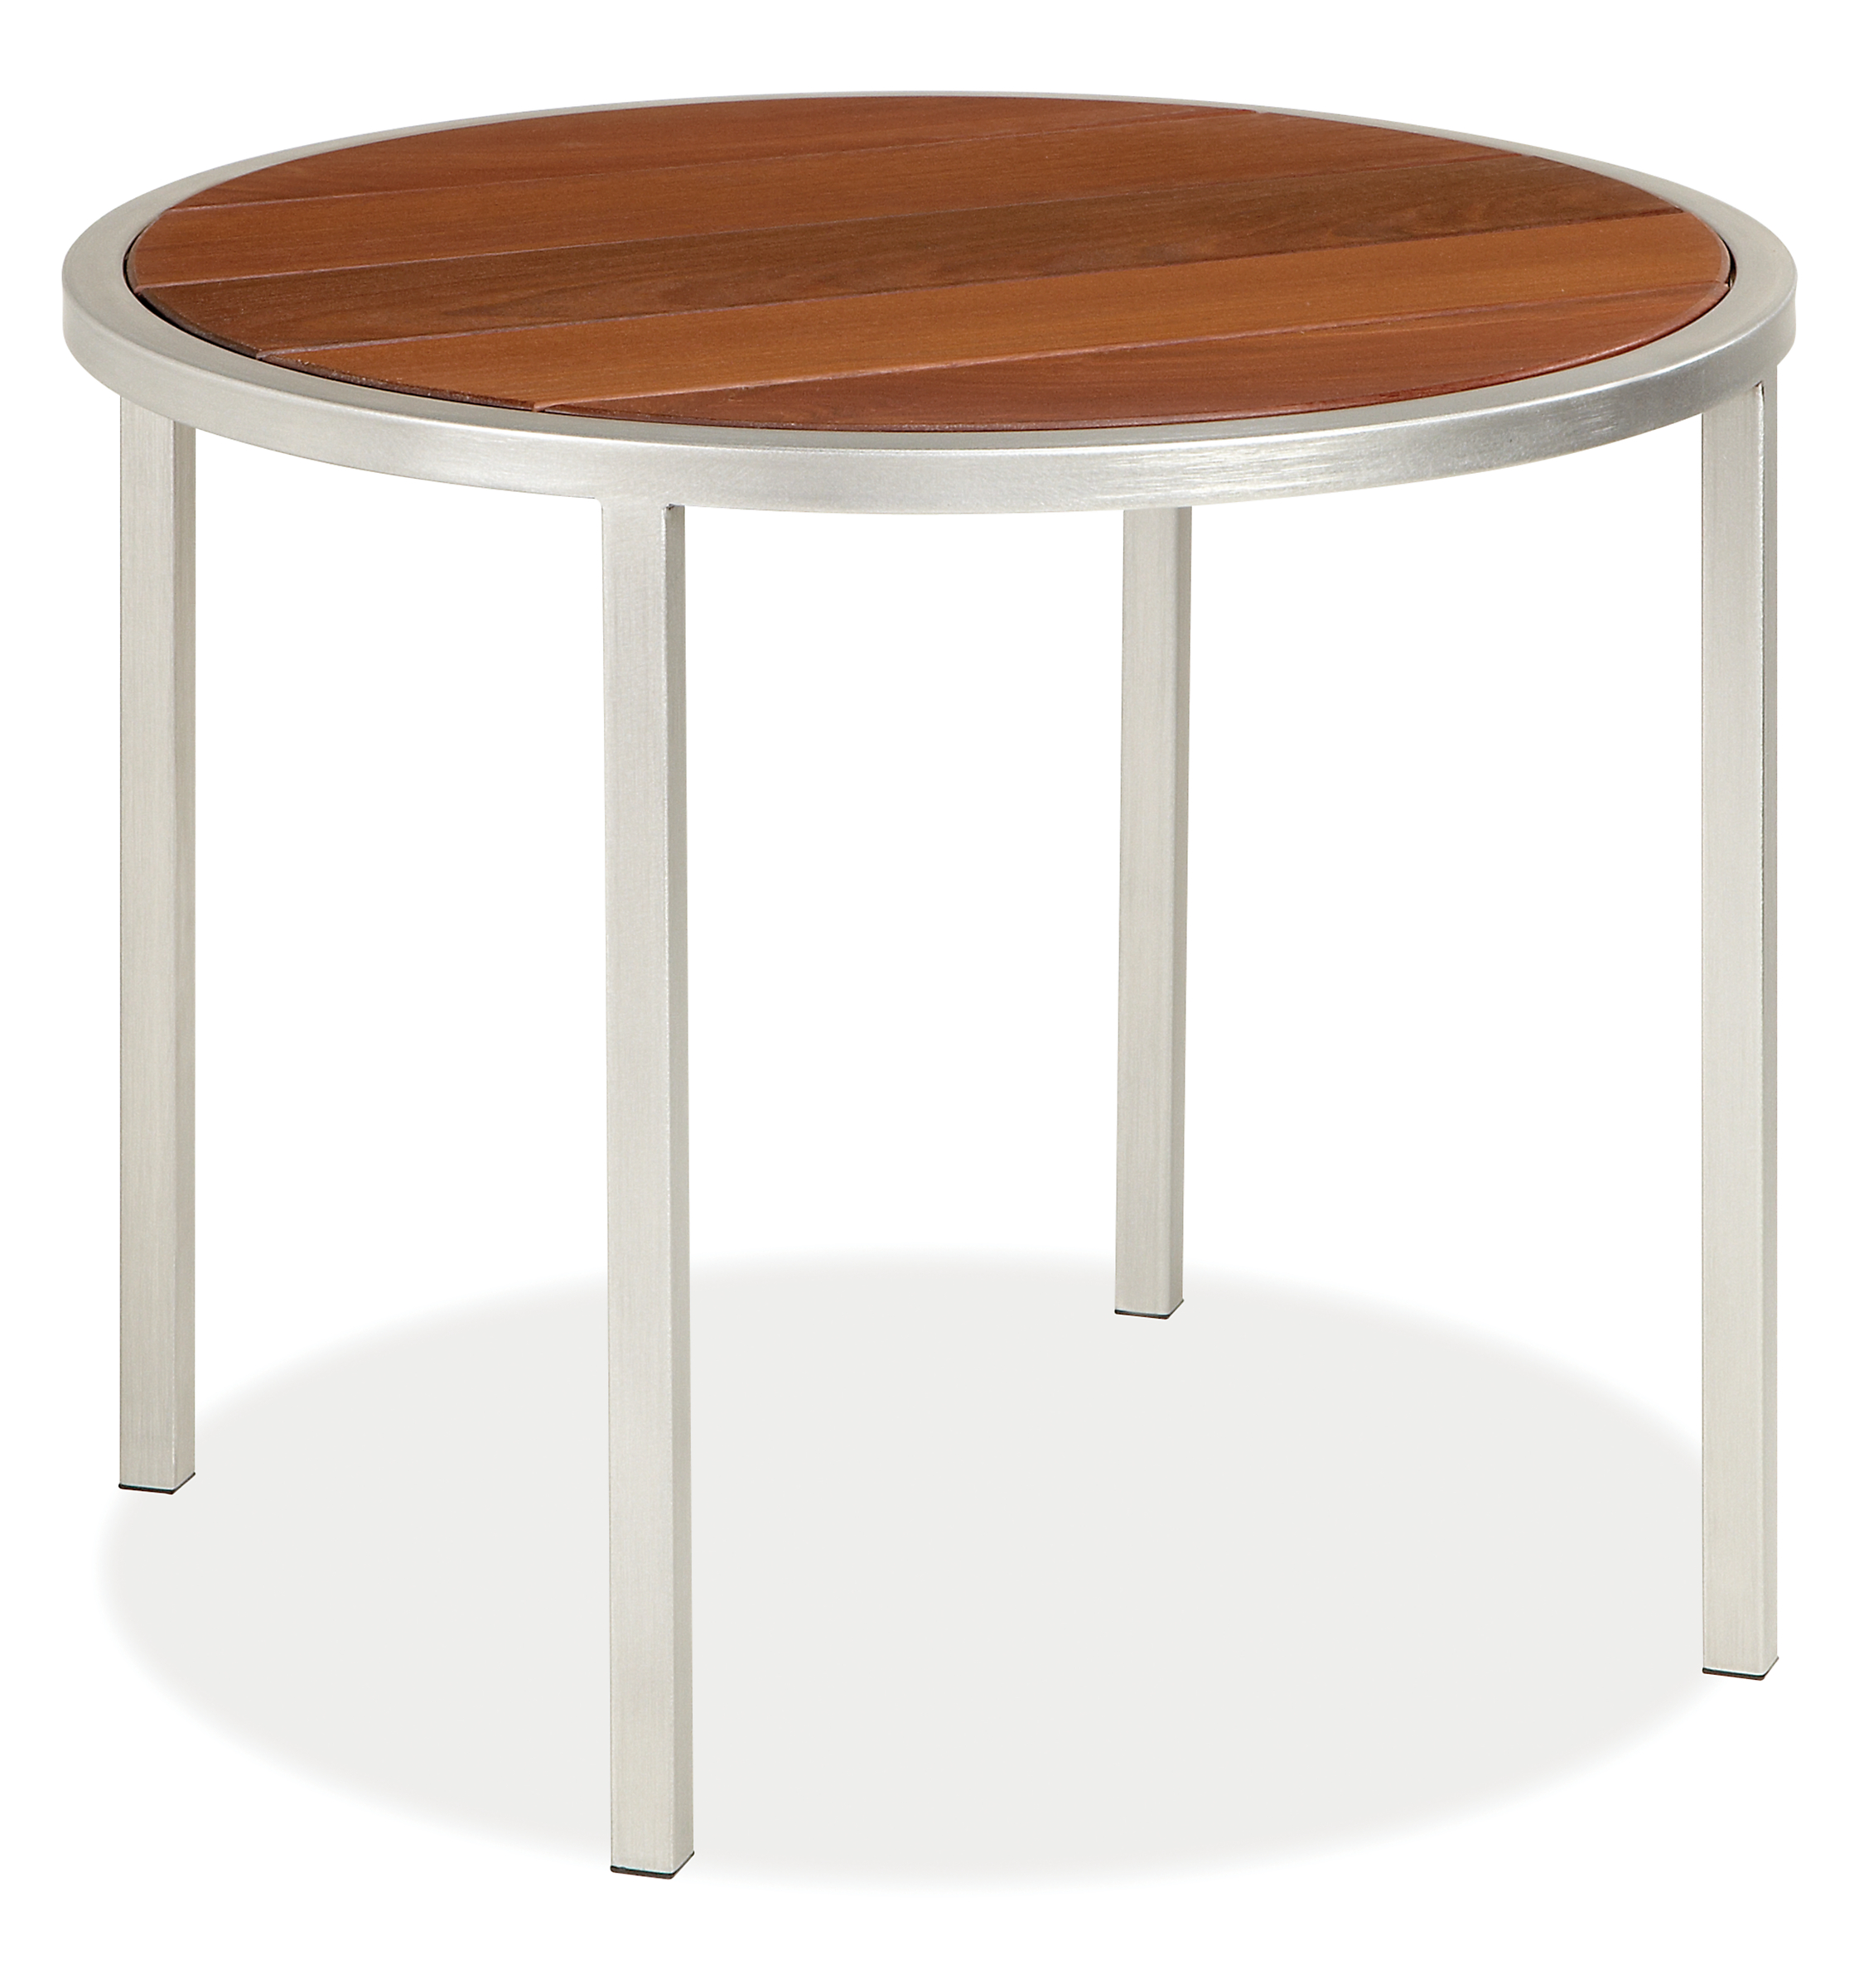 Montego 27 diam 22h Round Side Table in Ipe with Stainless Steel